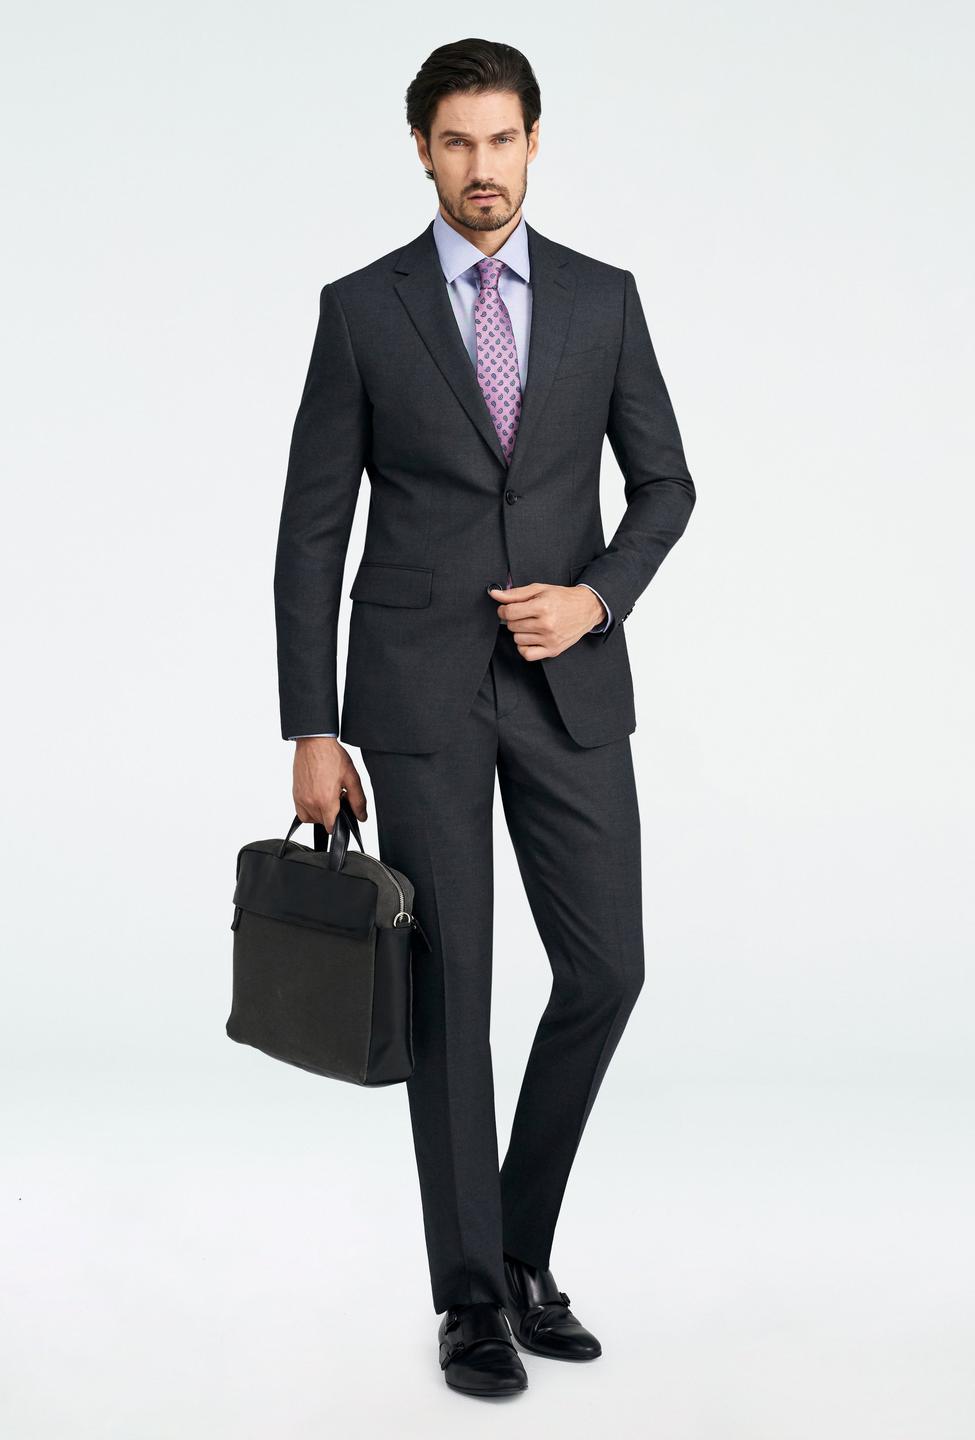 Gray suit - Hayward Solid Design from Luxury Indochino Collection